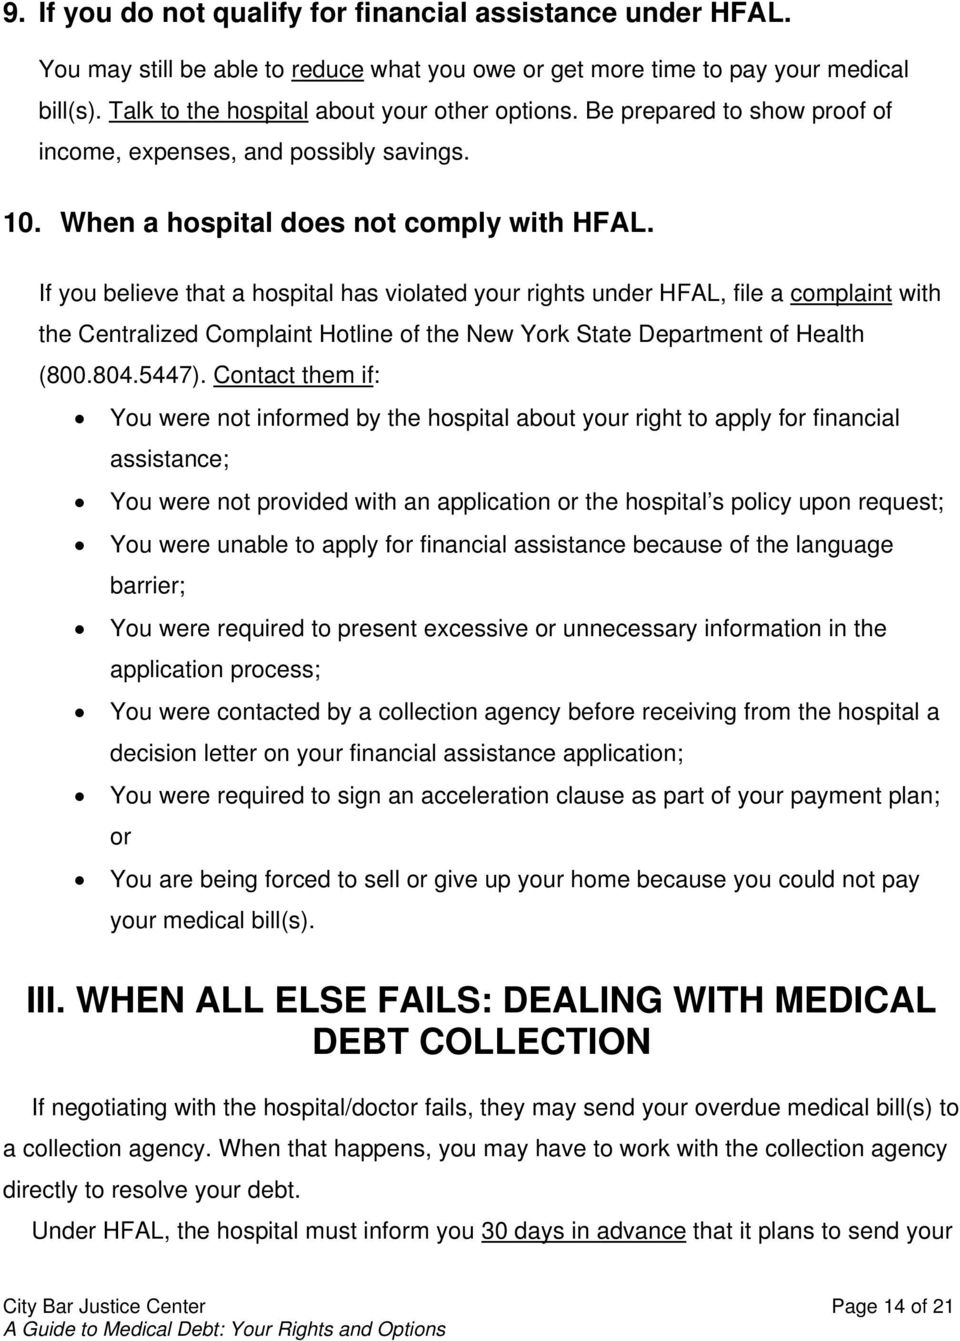 If you believe that a hospital has violated your rights under HFAL, file a complaint with the Centralized Complaint Hotline of the New York State Department of Health (800.804.5447).